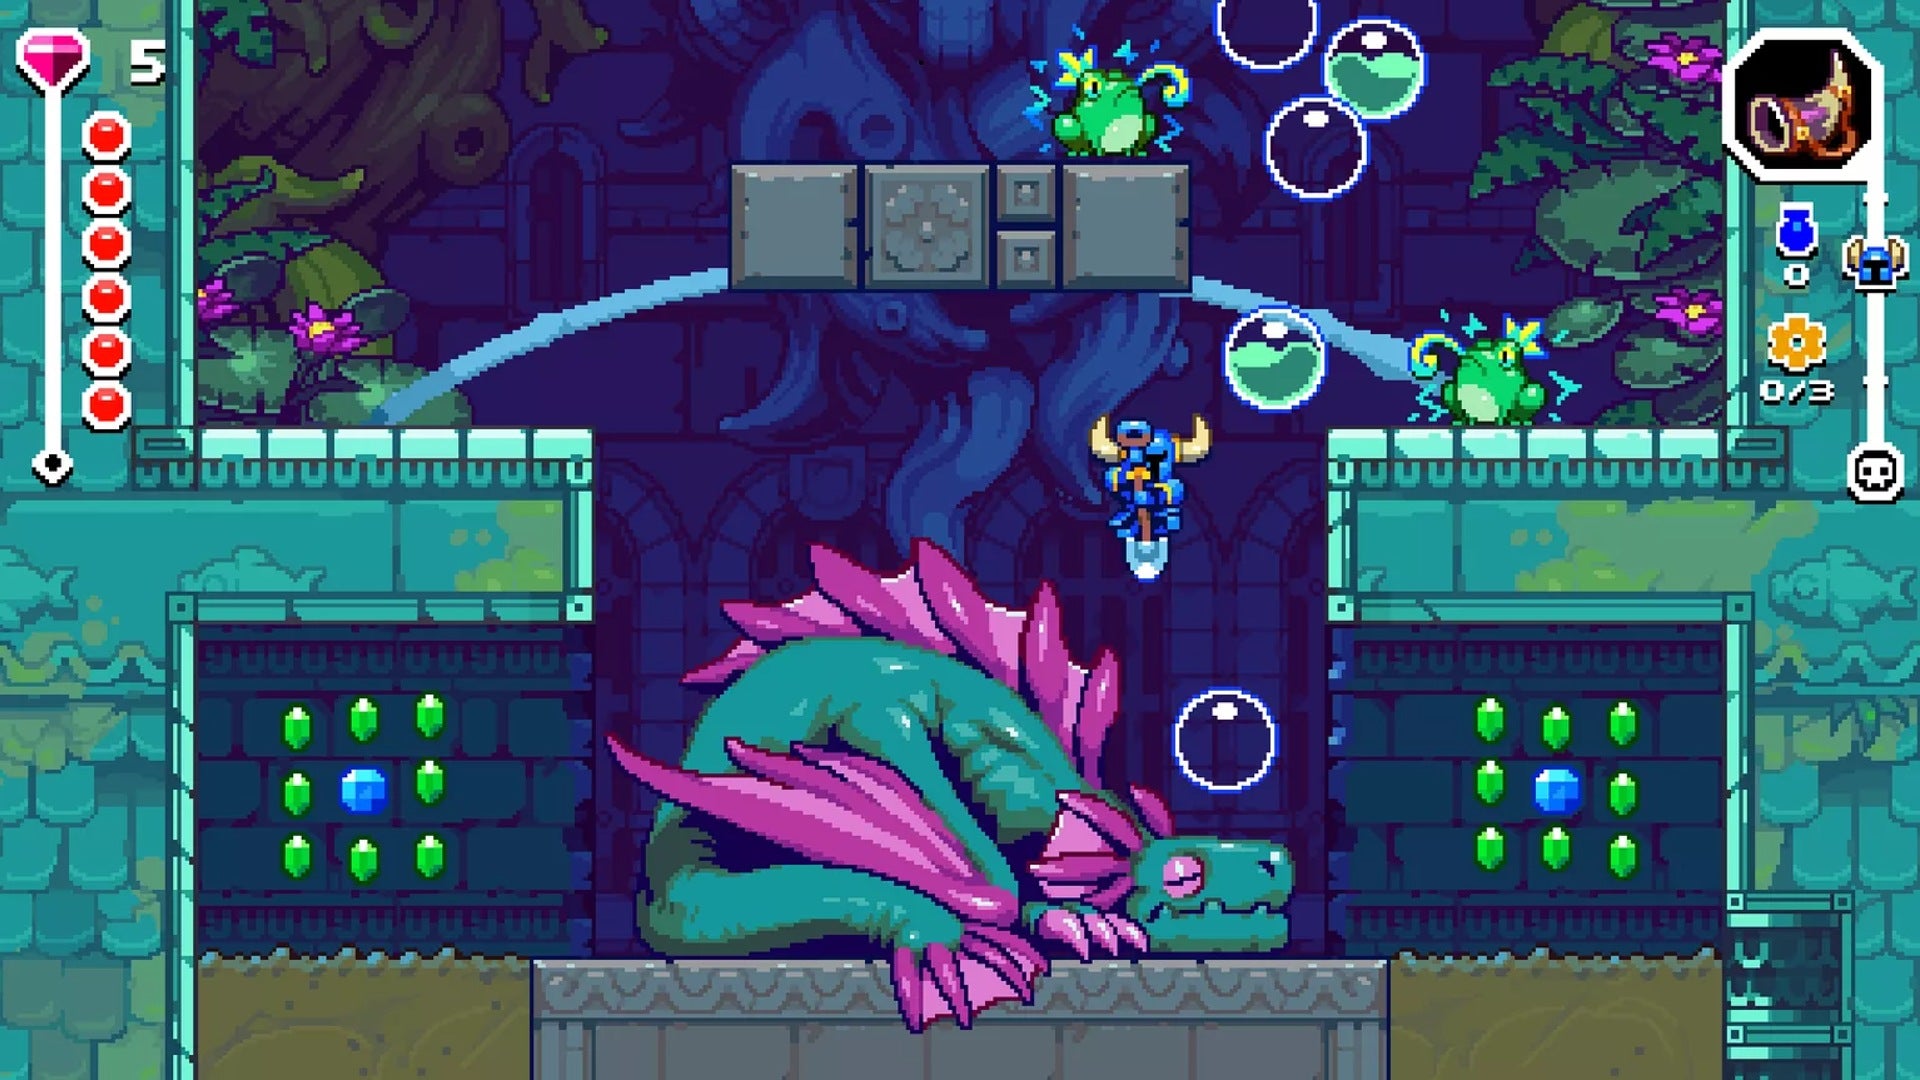 Daily News | Online News Shovel Knight dig is a procedurally generated platformer coming to Steam from Yacht Club Games and Nitrome in September 2022.